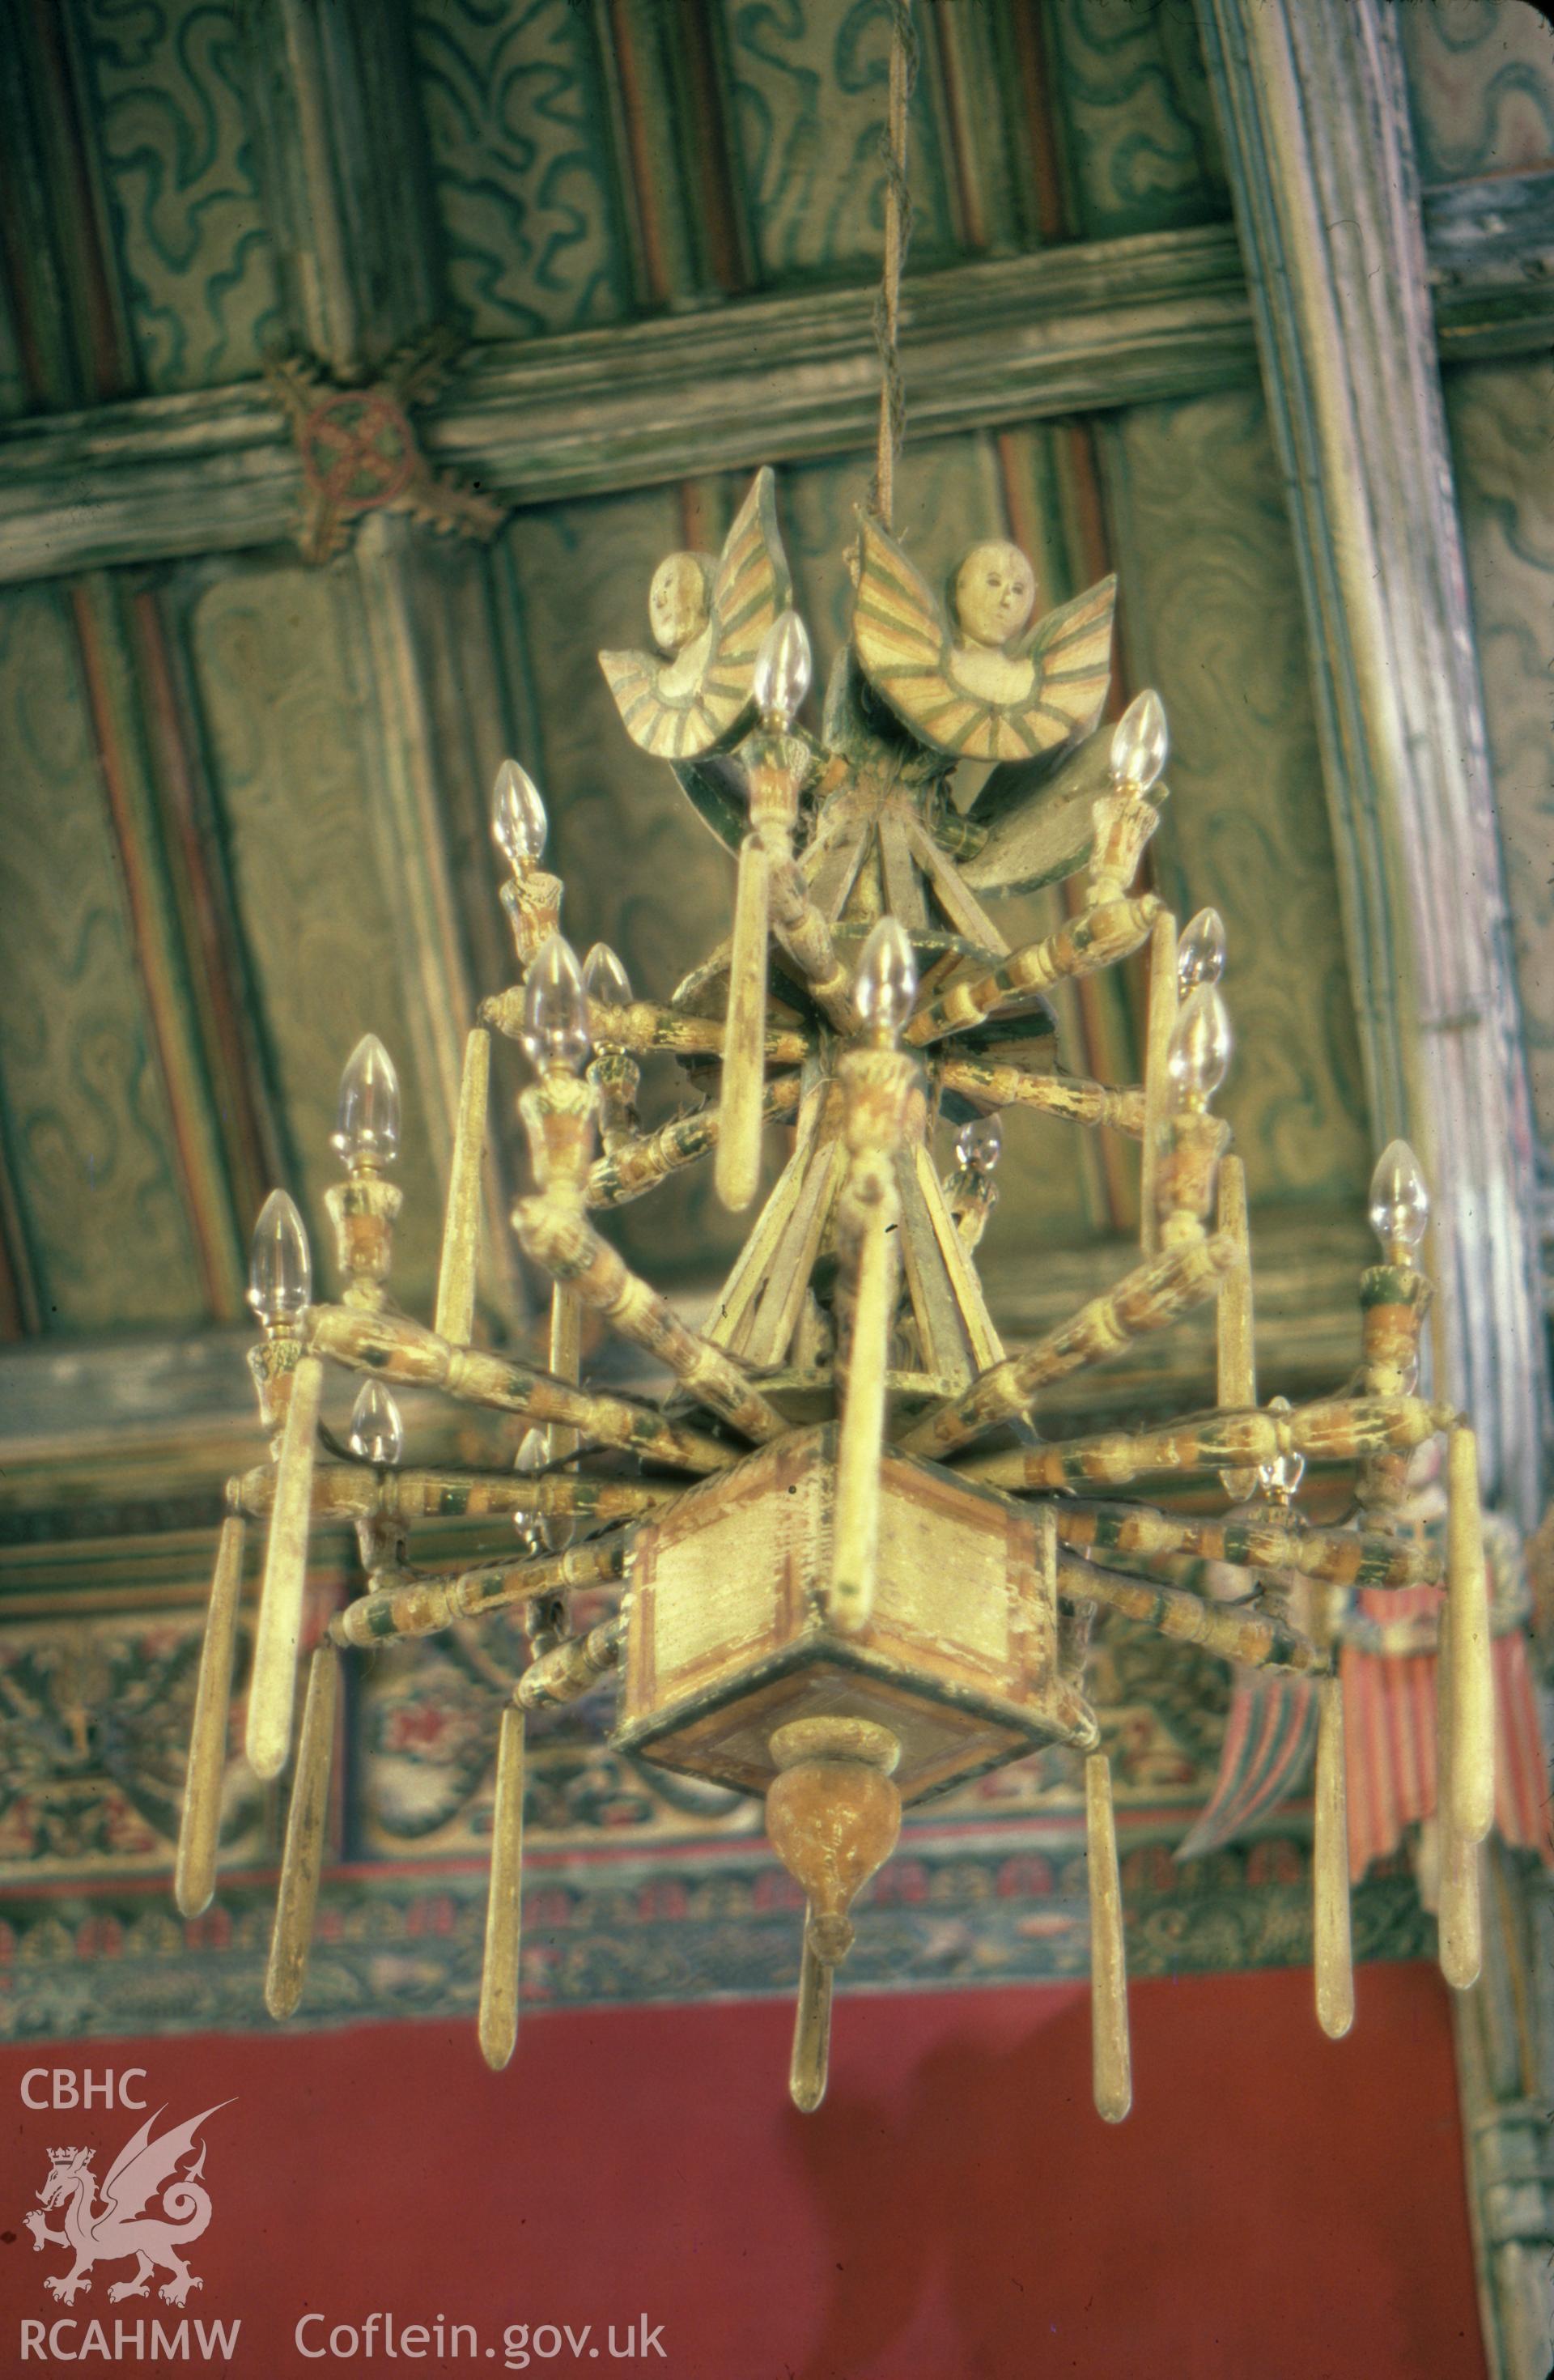 Colour slide showing view of candelabra in Rug Chapel.